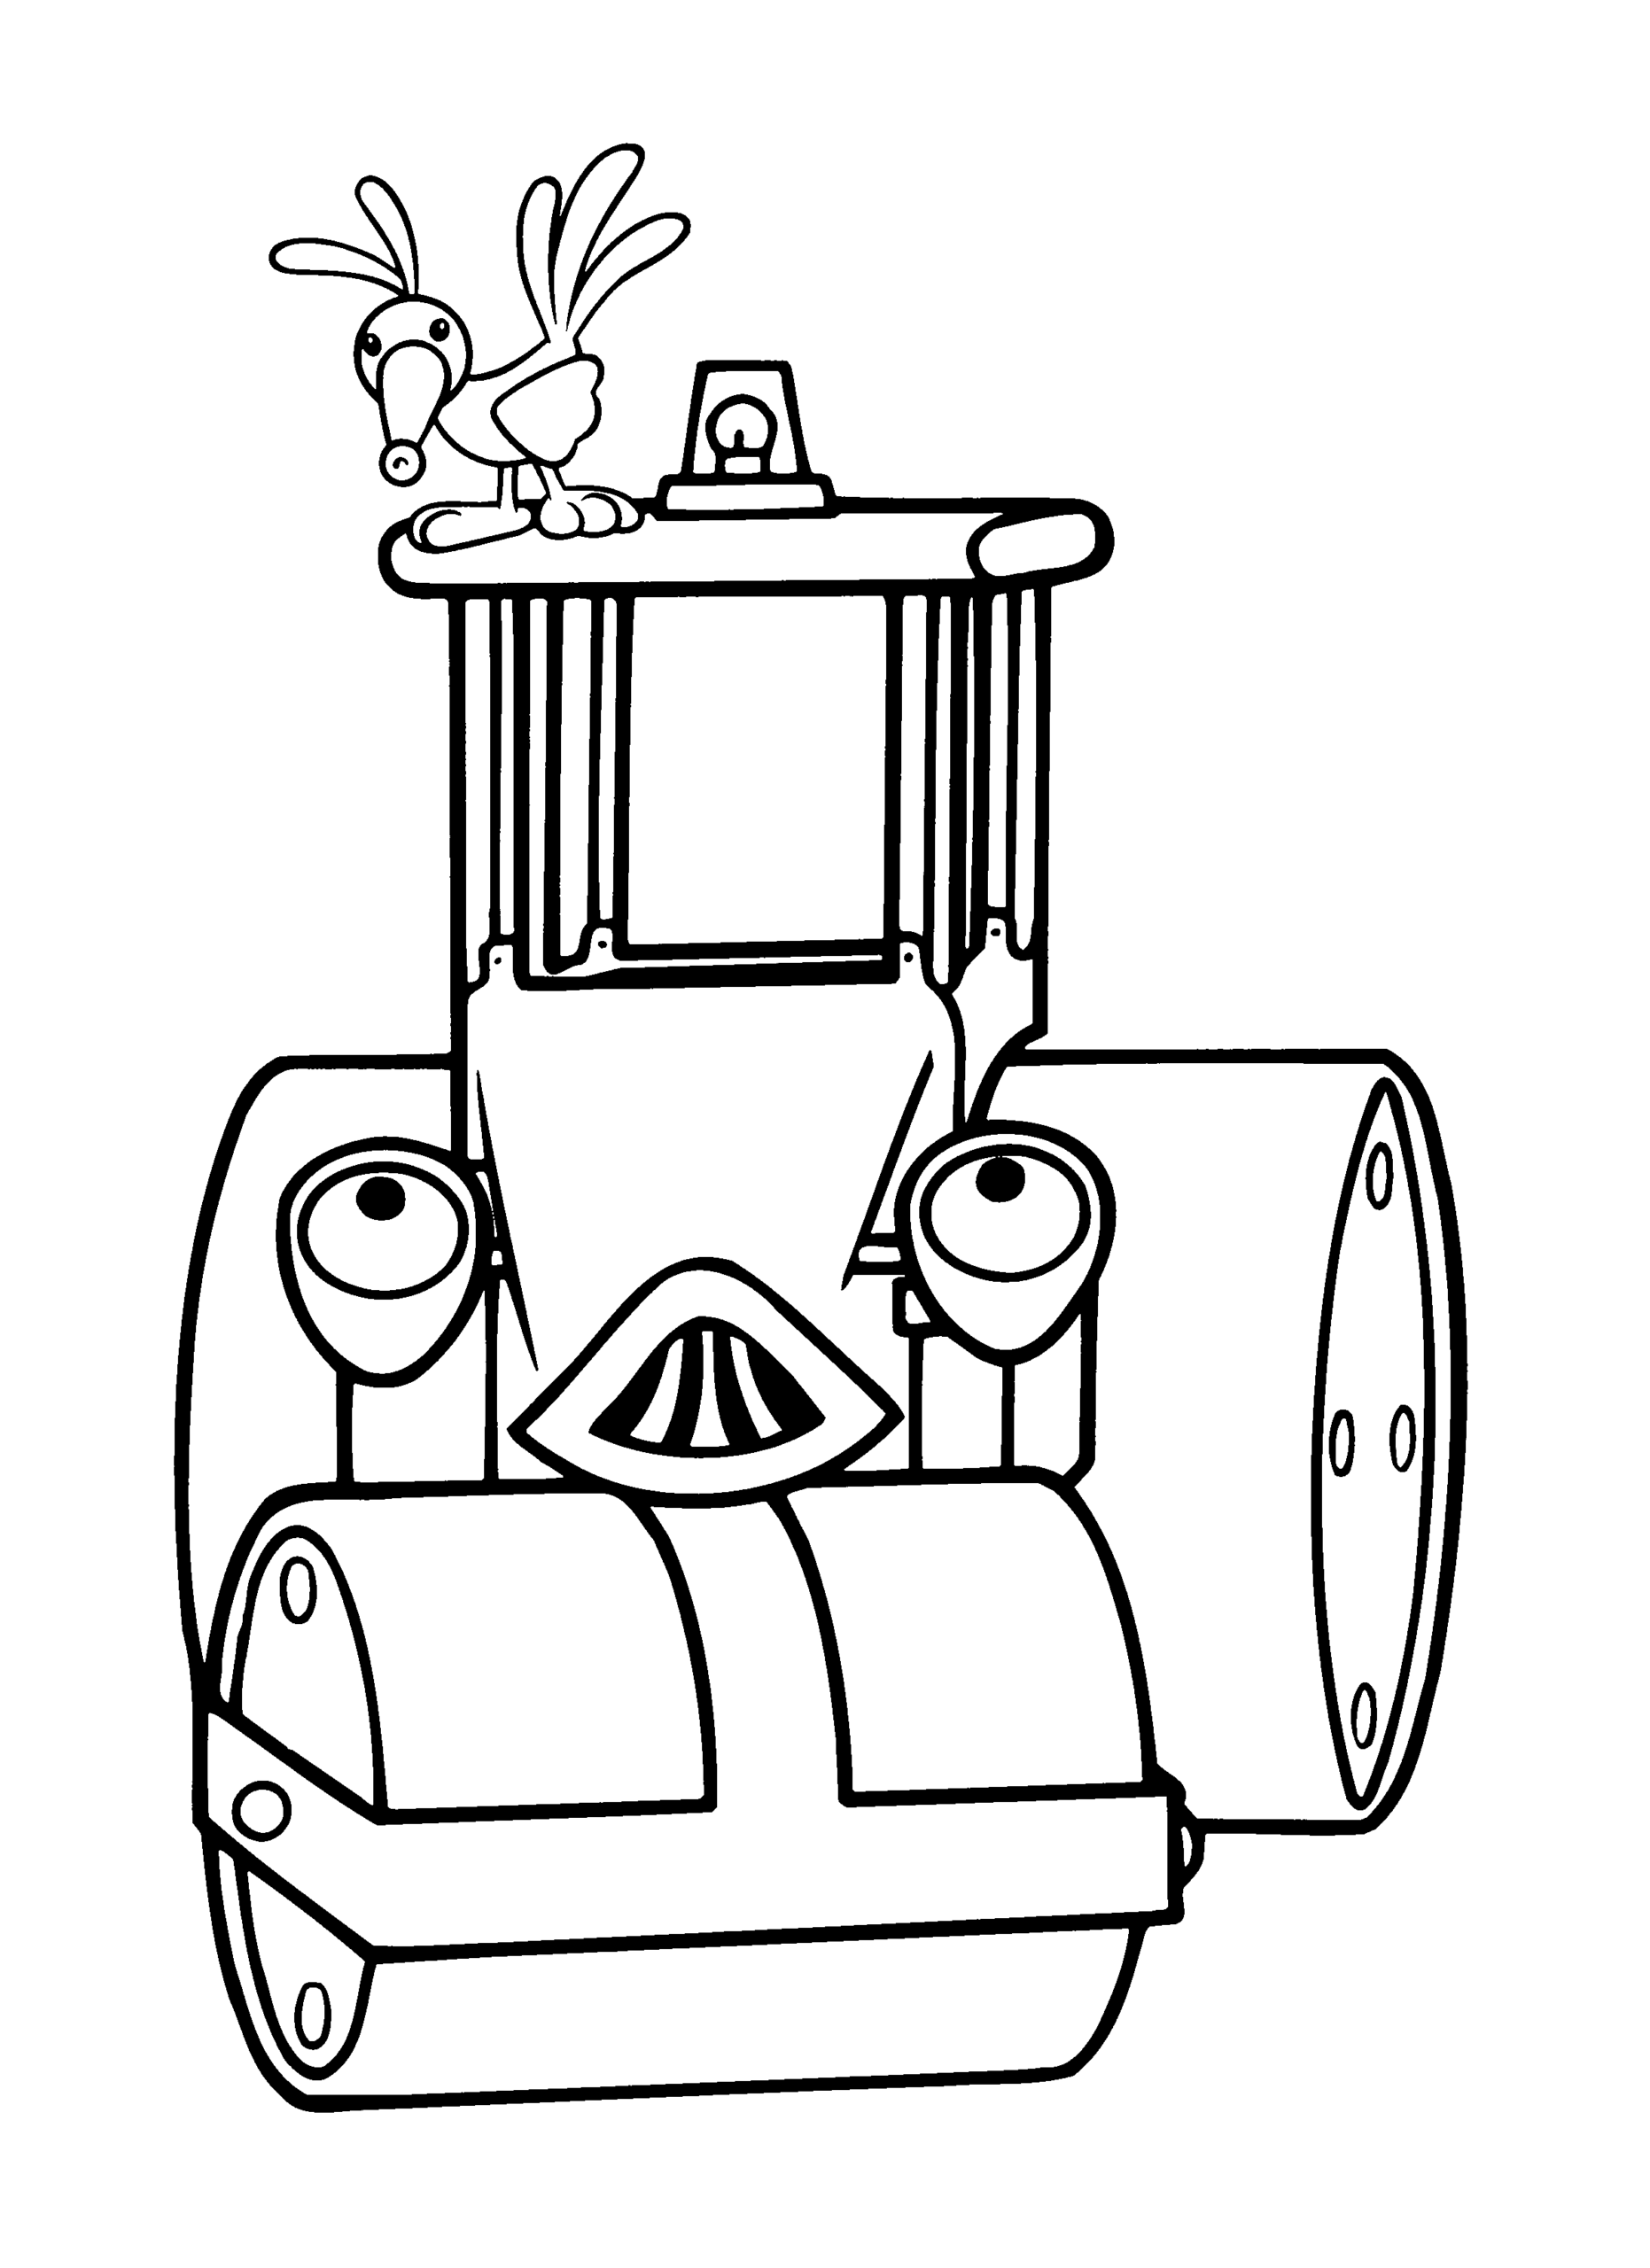 Bob the Builder Coloring Pages TV Film bob the builder 31 Printable 2020 01050 Coloring4free